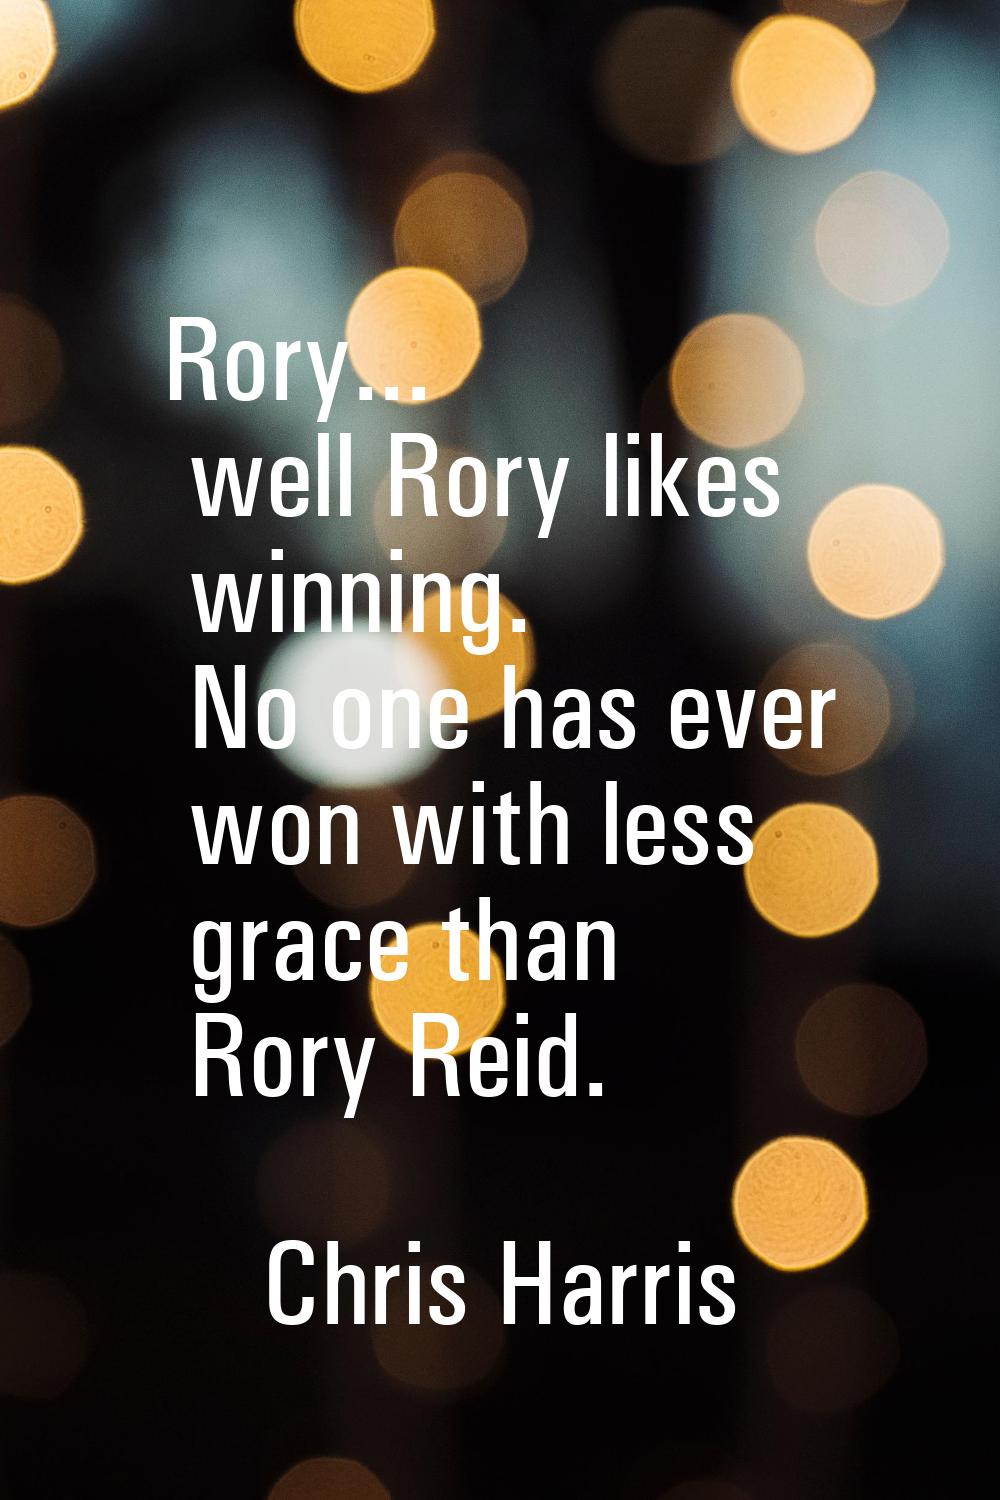 Rory... well Rory likes winning. No one has ever won with less grace than Rory Reid.